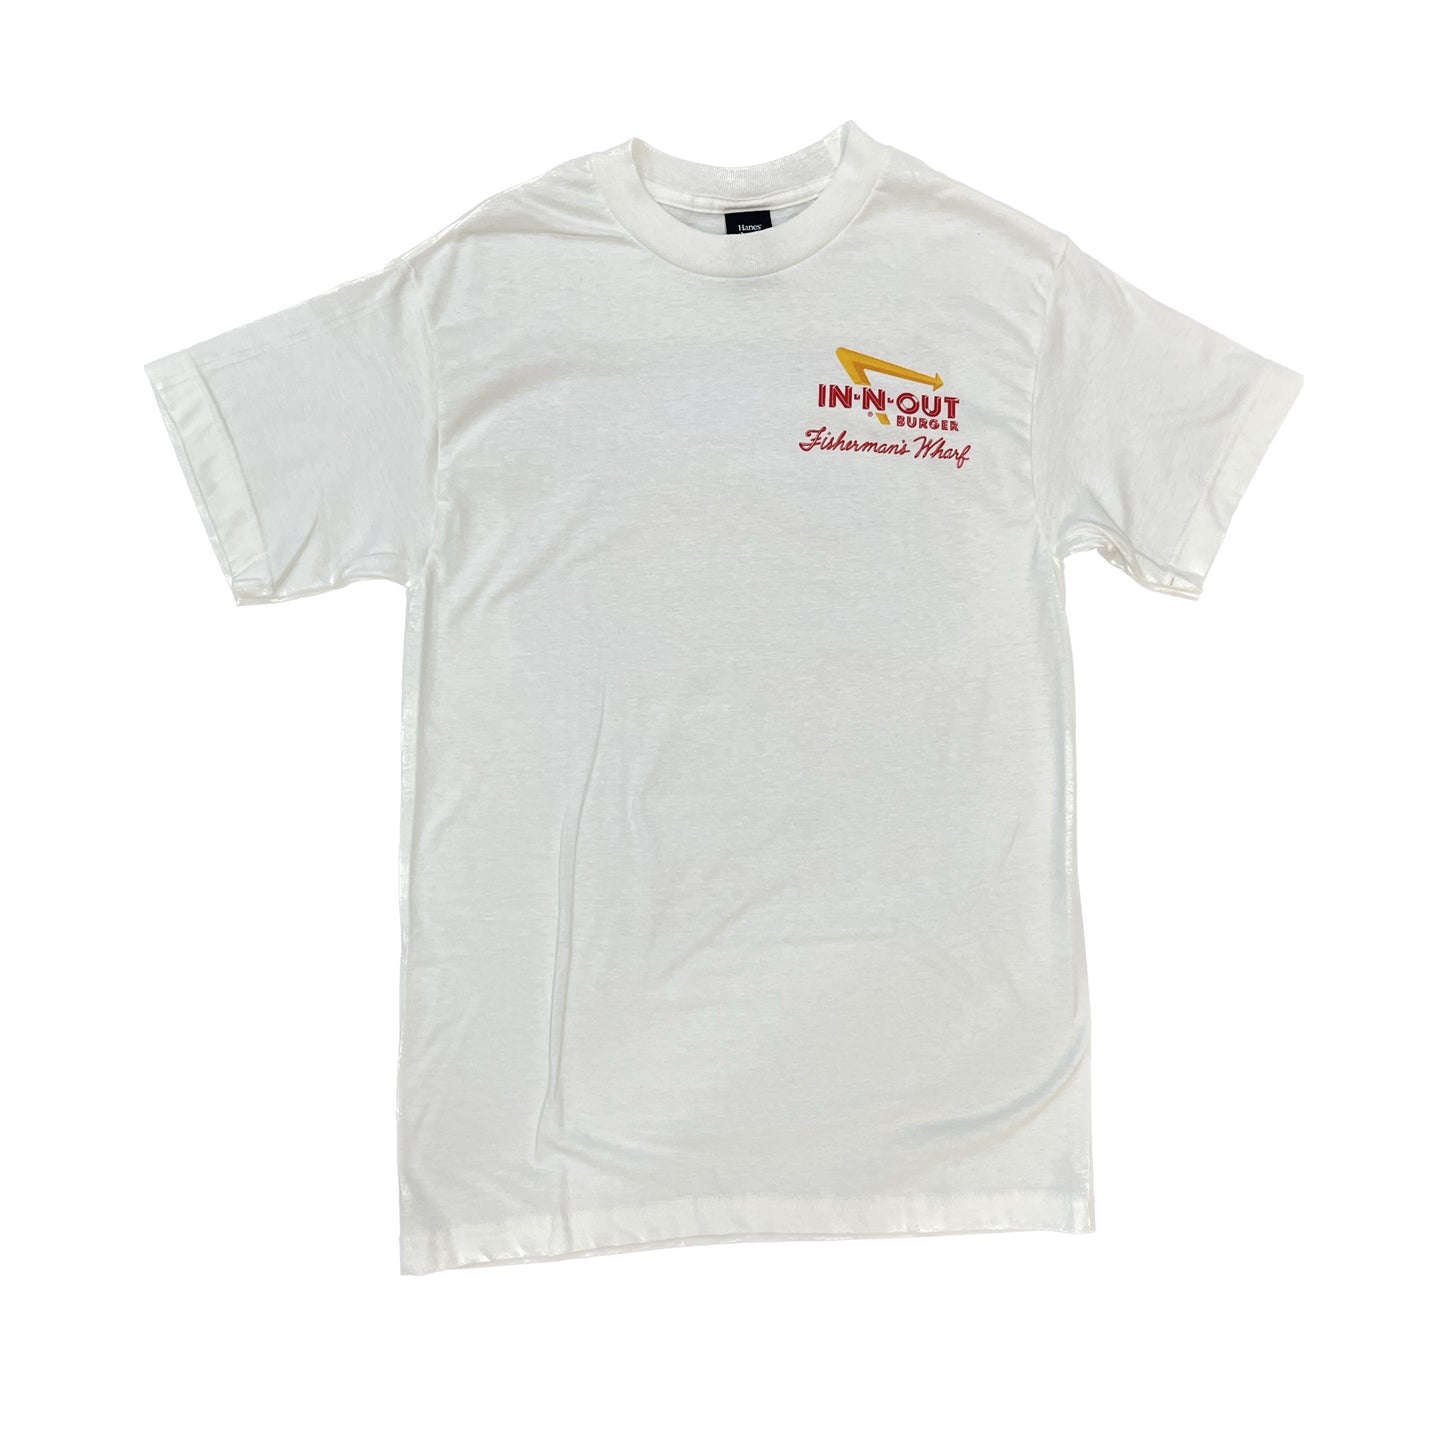 In-N-Out Fishermans Wharf Restaurant Tee